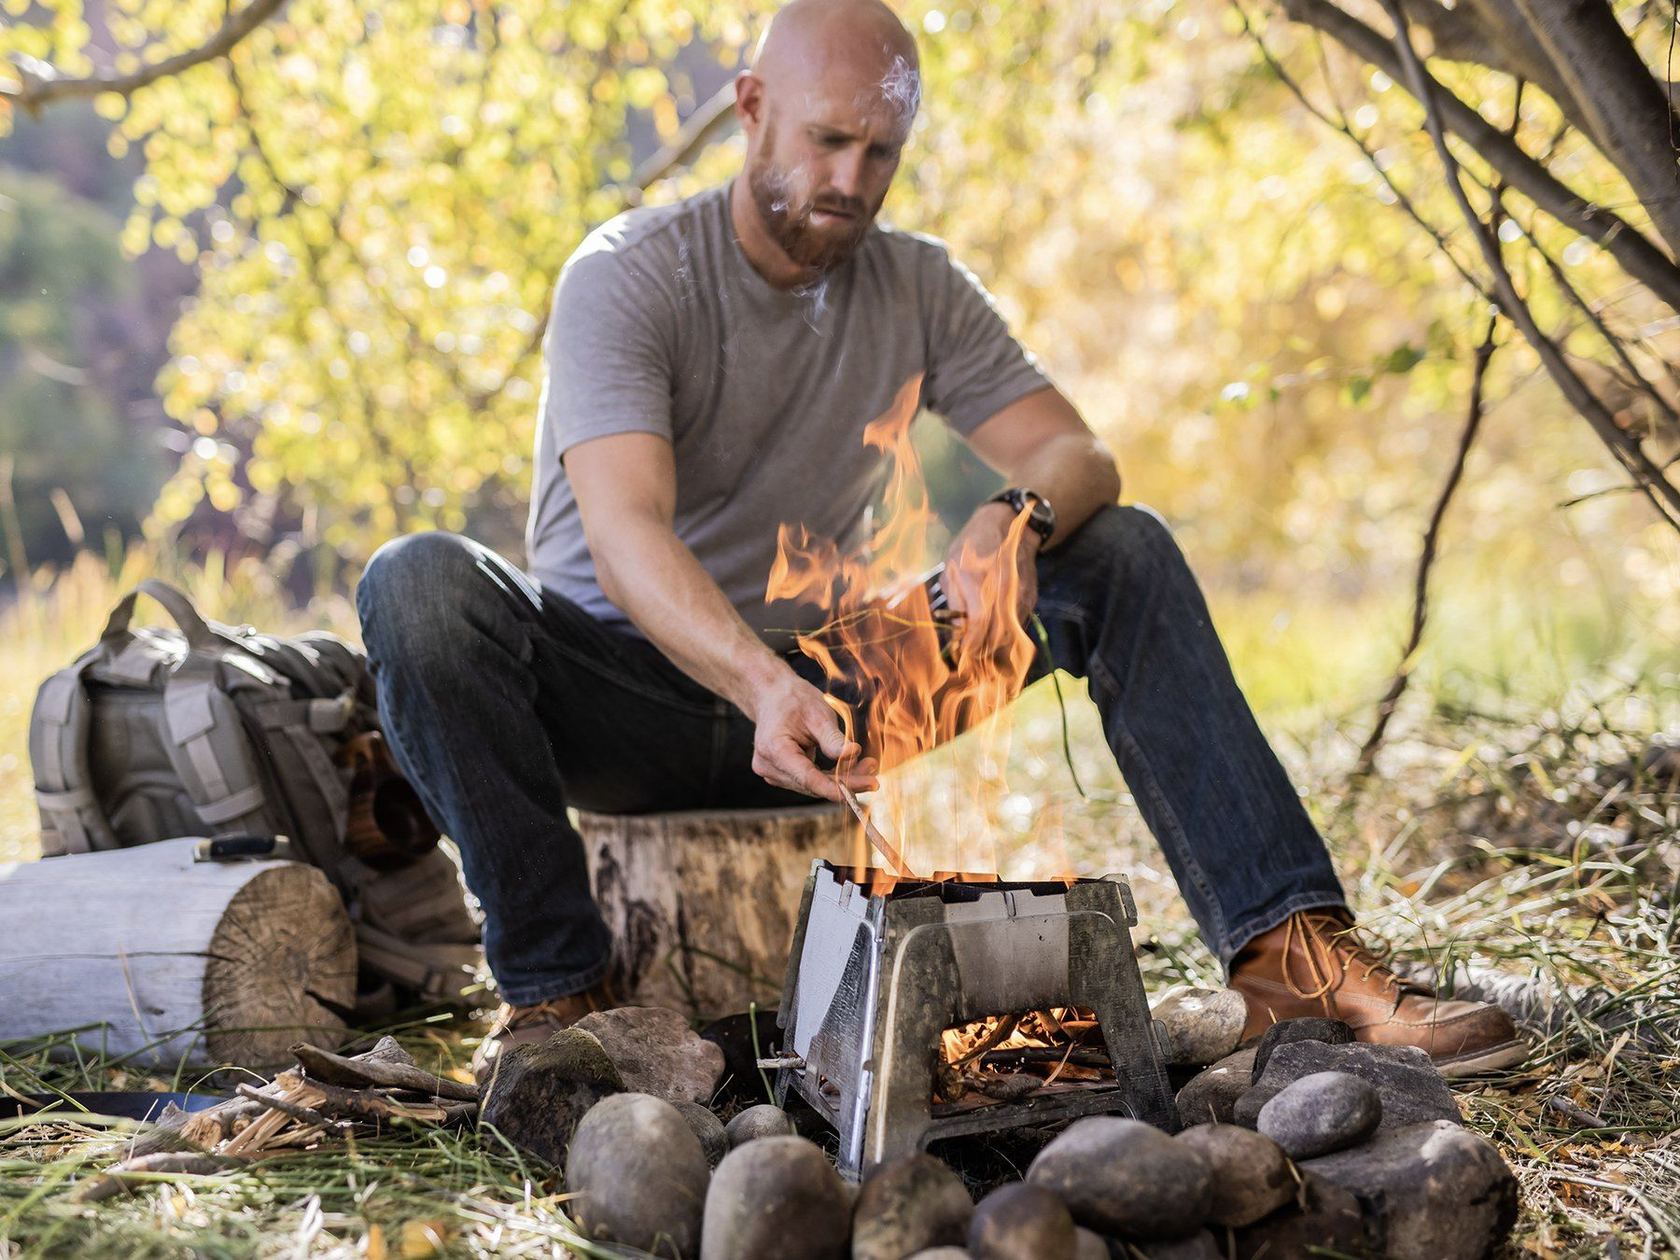 Barebones | Portable Travel Camping Fire Pit - Folds Flat, Camping Stoves, Barebones, Defiance Outdoor Gear Co.